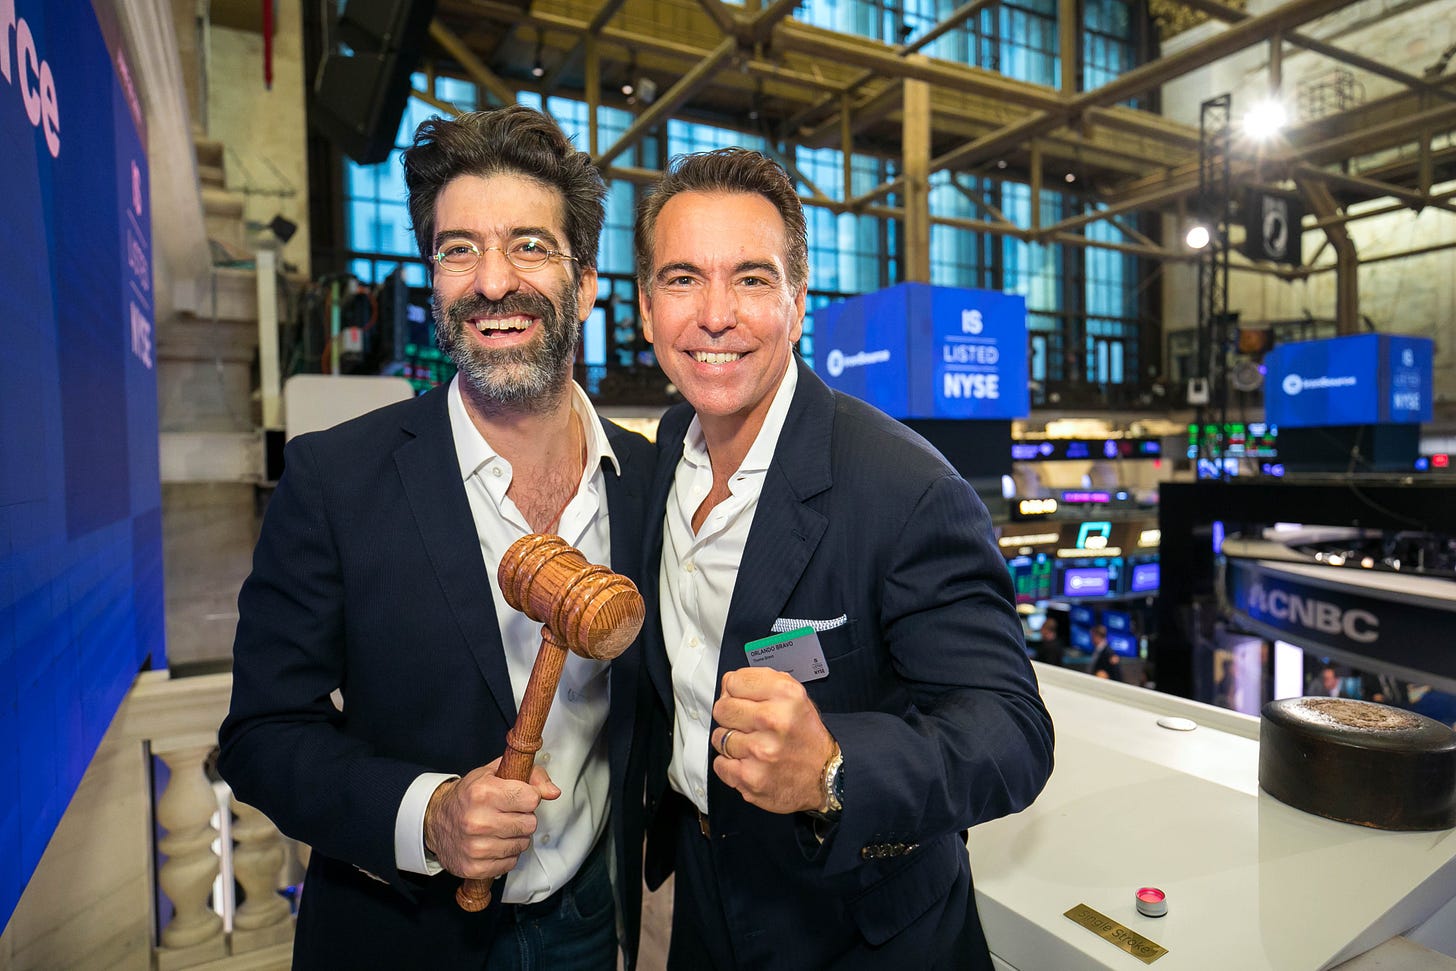 Orlando Bravo on Twitter: "RT @NYSE: .@IronSource (NYSE: $IS) has  officially joined our #NYSECommunity! 🏛 Congratulations to Tomer Bar Zeev  and the rest of the ironSo…" / Twitter